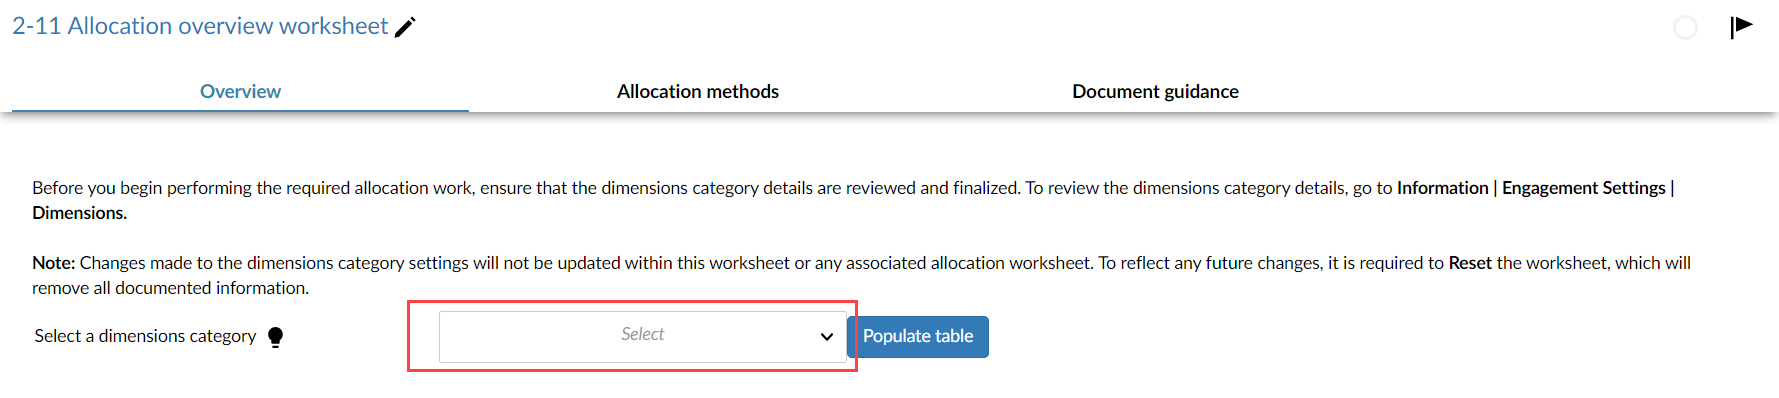 The dimensions category drop-down in the allocation overview worksheet.